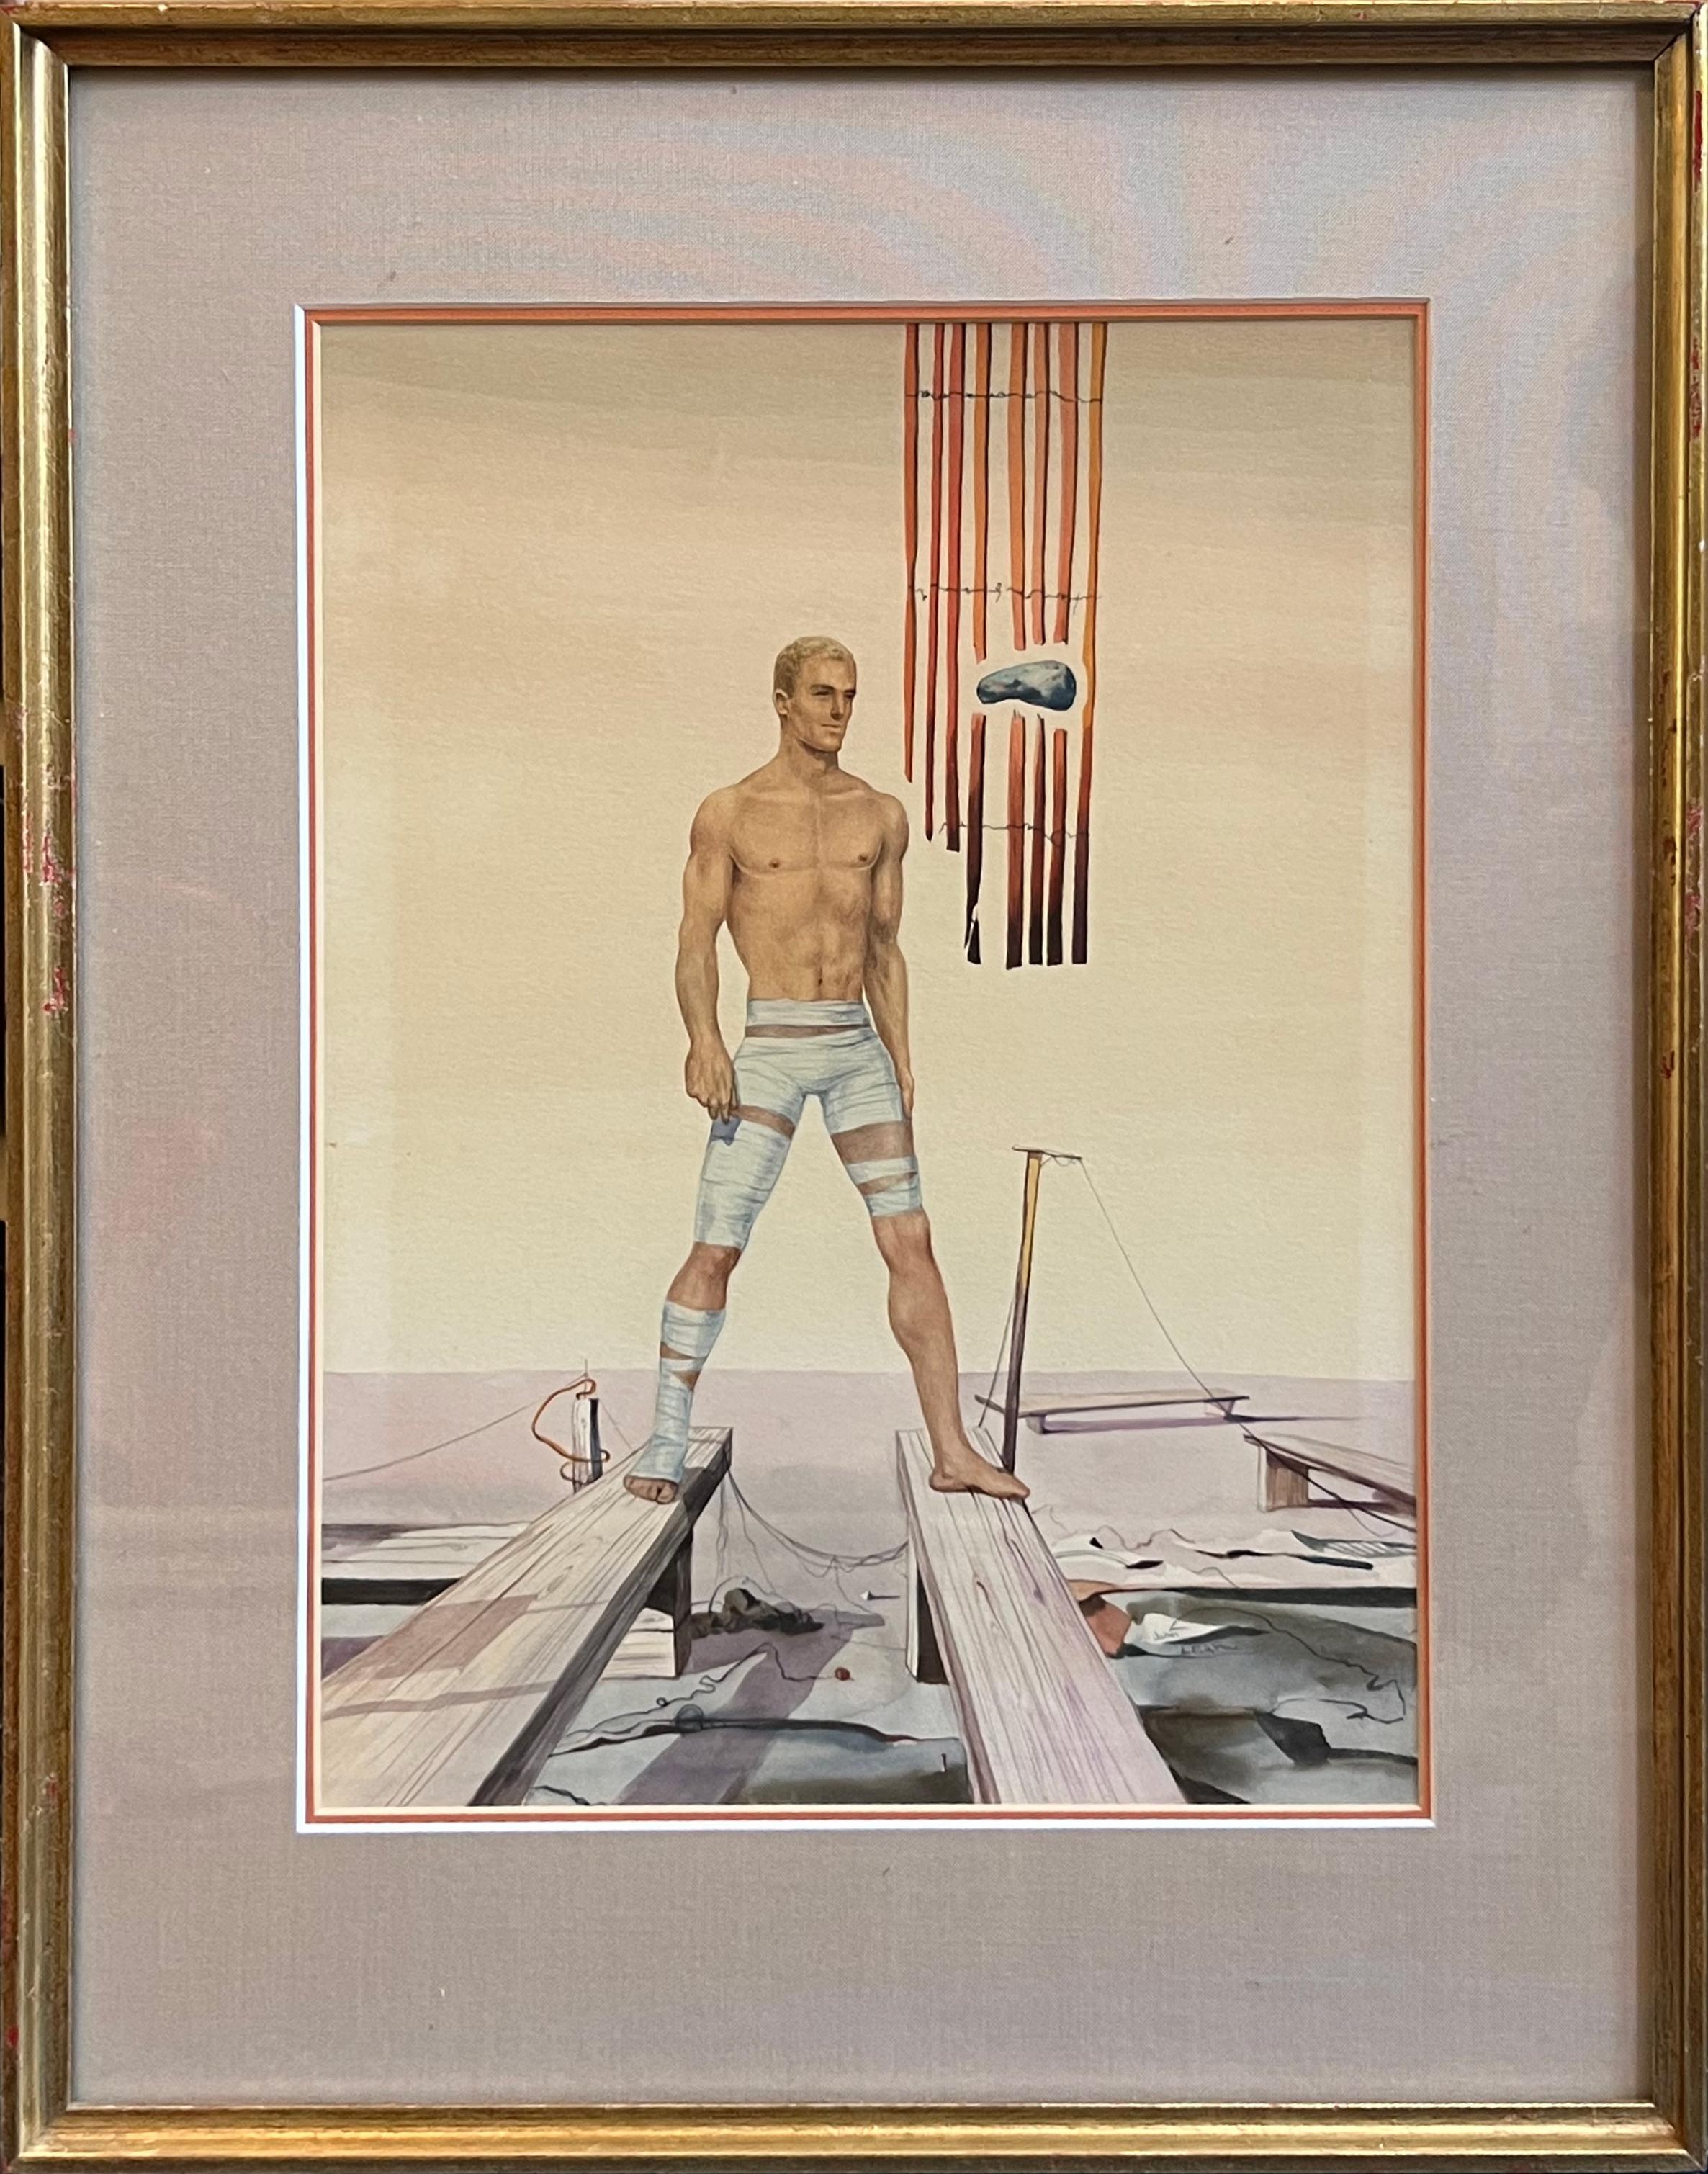 Dystopischer MALE NUDE ATHLETE Surreal – Painting von John Brock Lear, Jr. 